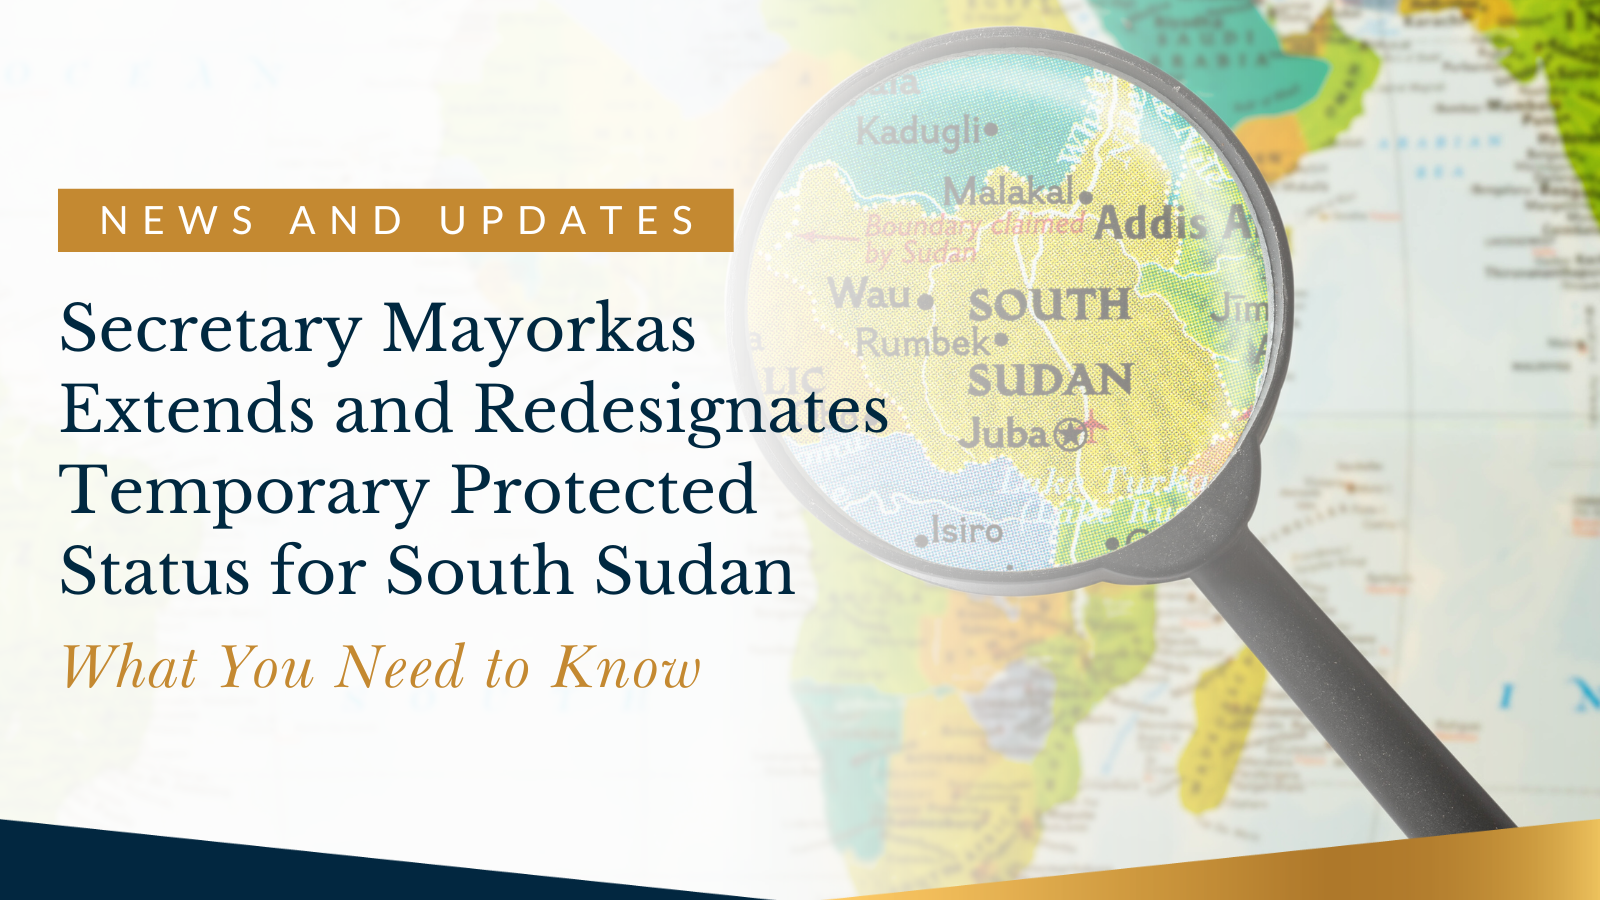 Secretary Mayorkas Extends and Redesignates Temporary Protected Status for South Sudan